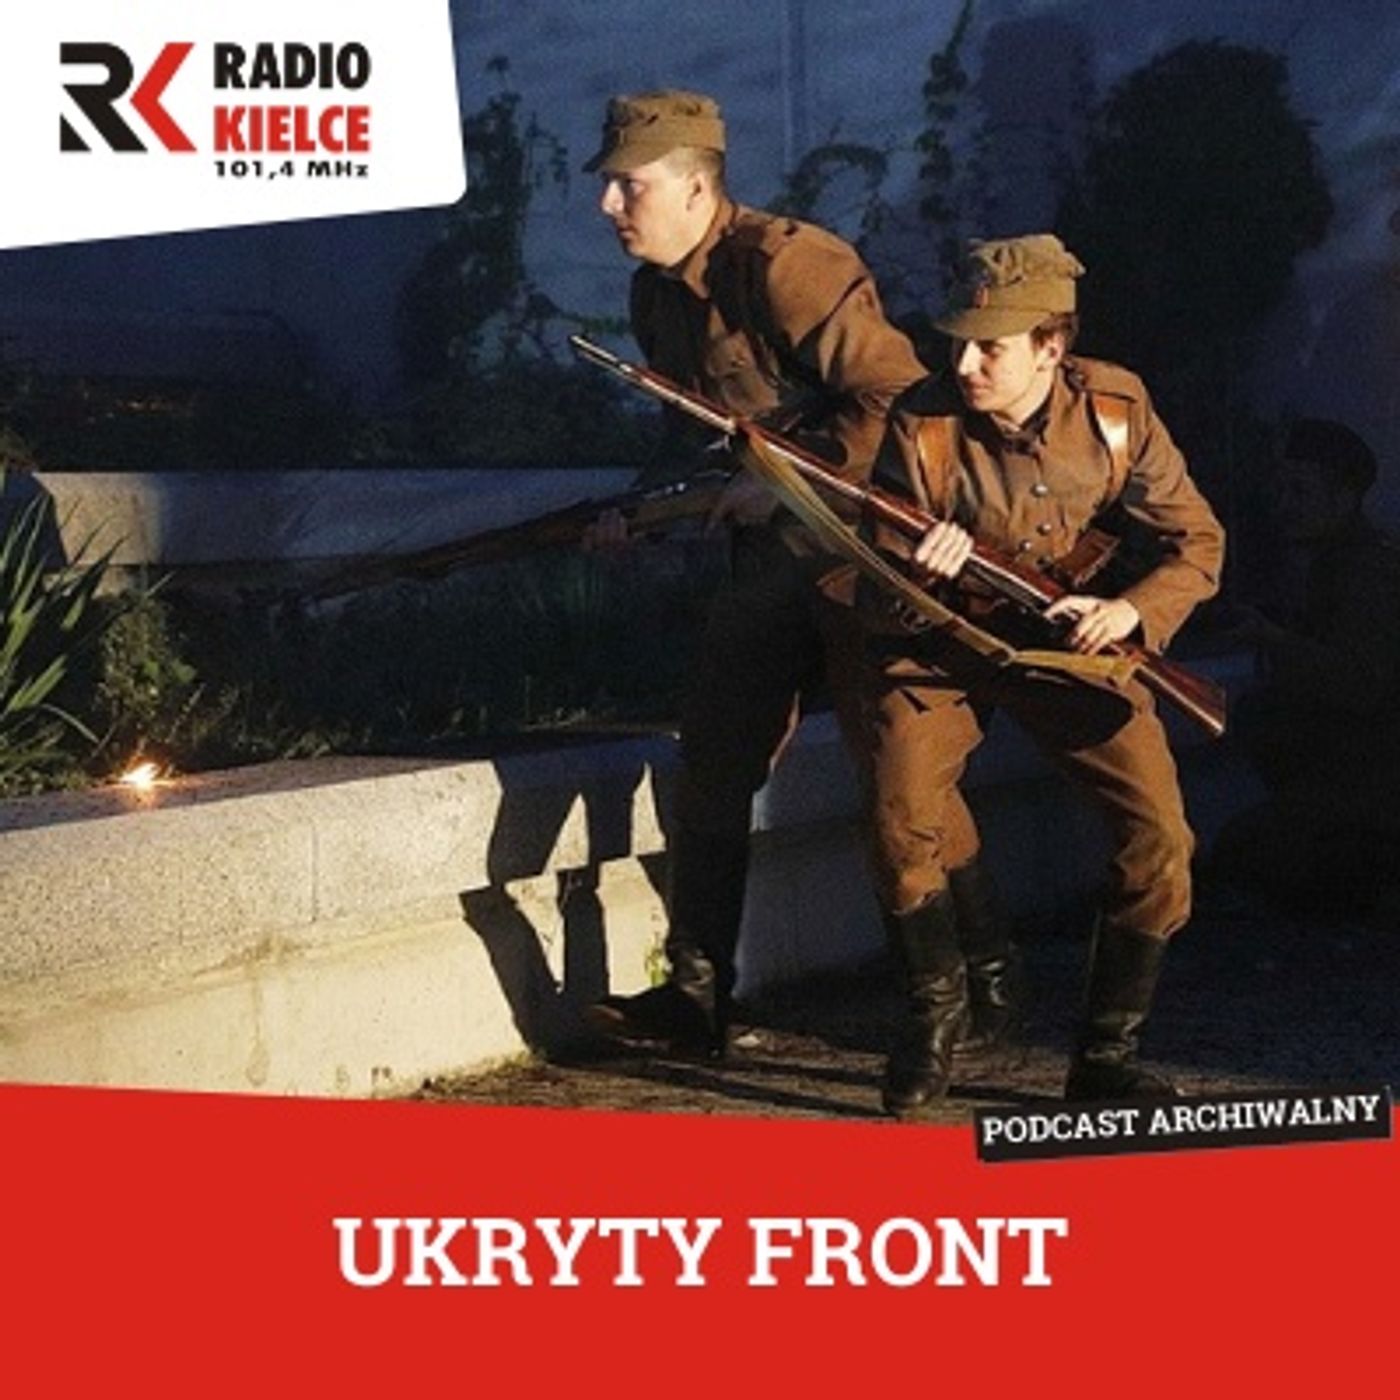 UKRYTY FRONT